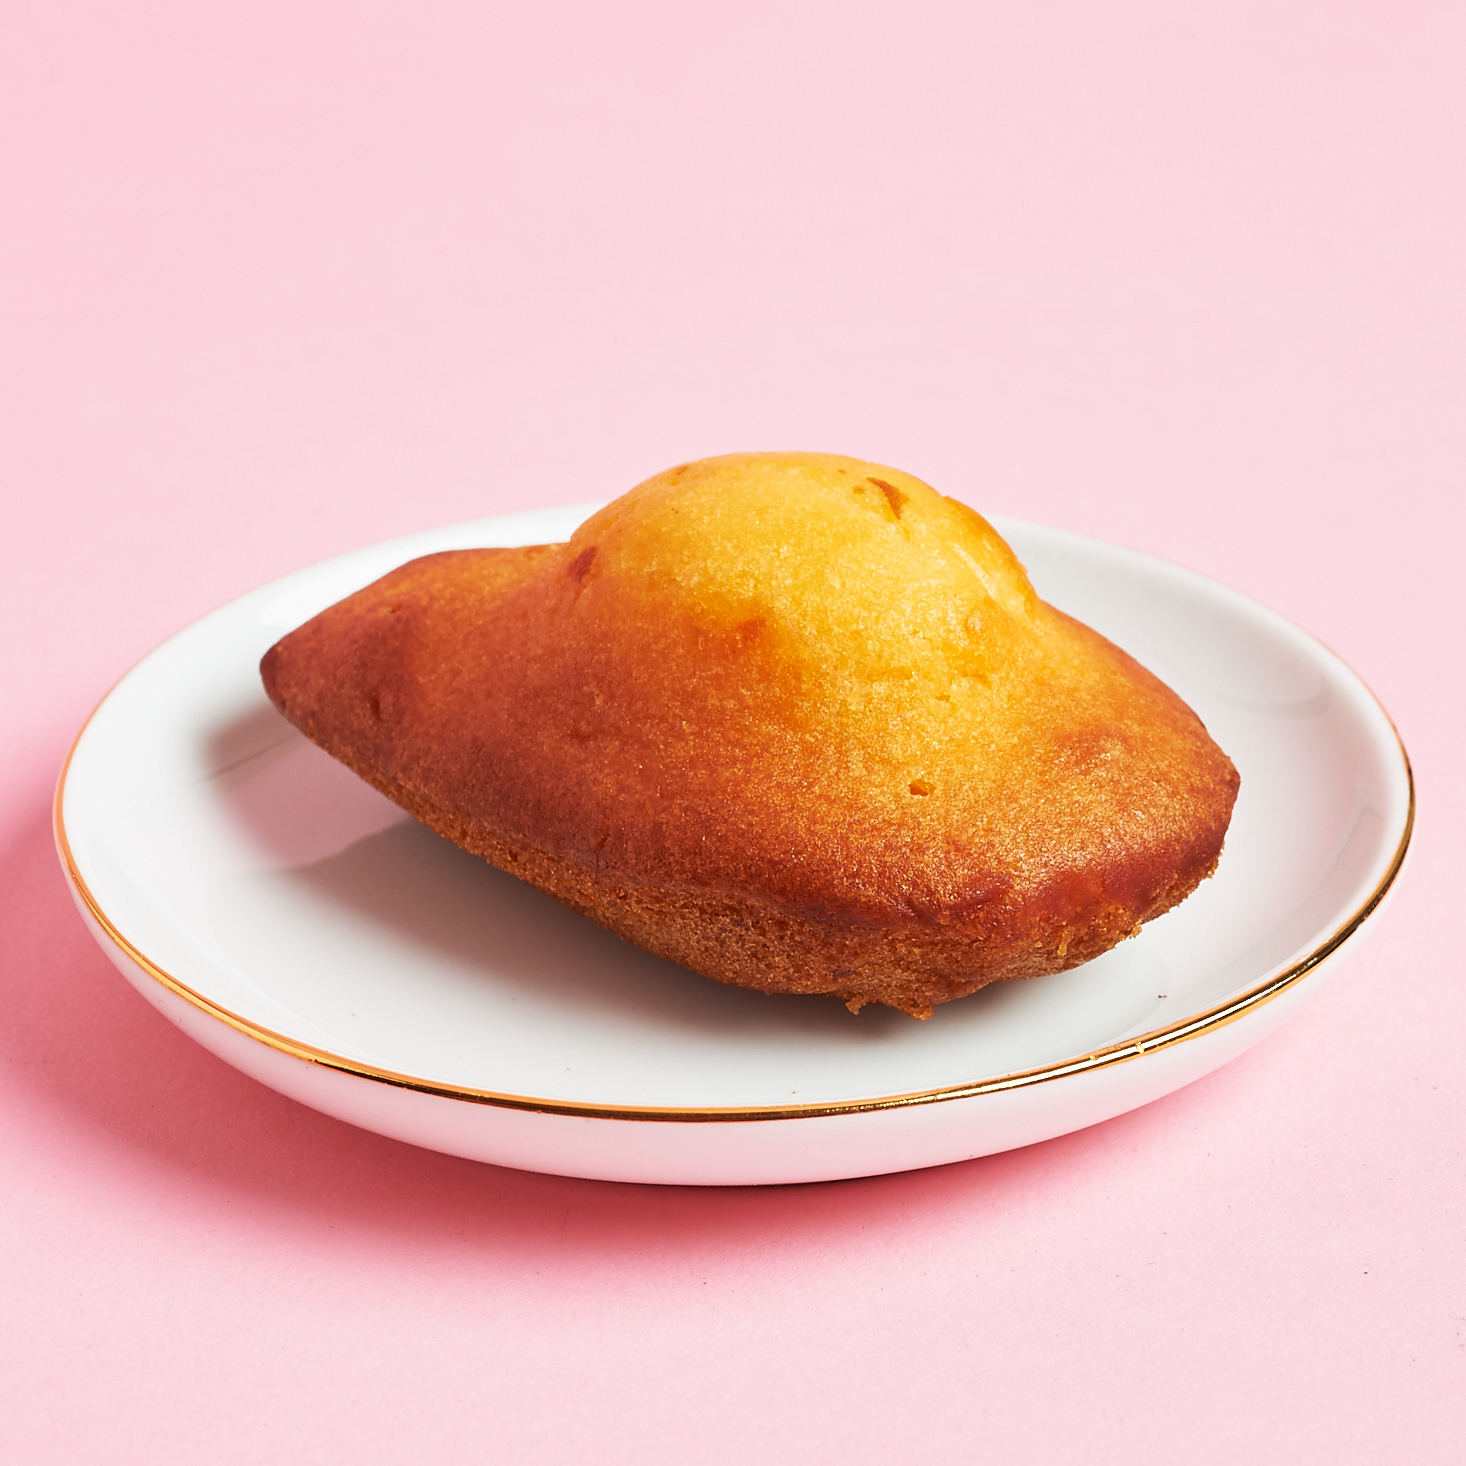 unwrapped OUI LOVE IT CLASSIC MADELEINE on plate